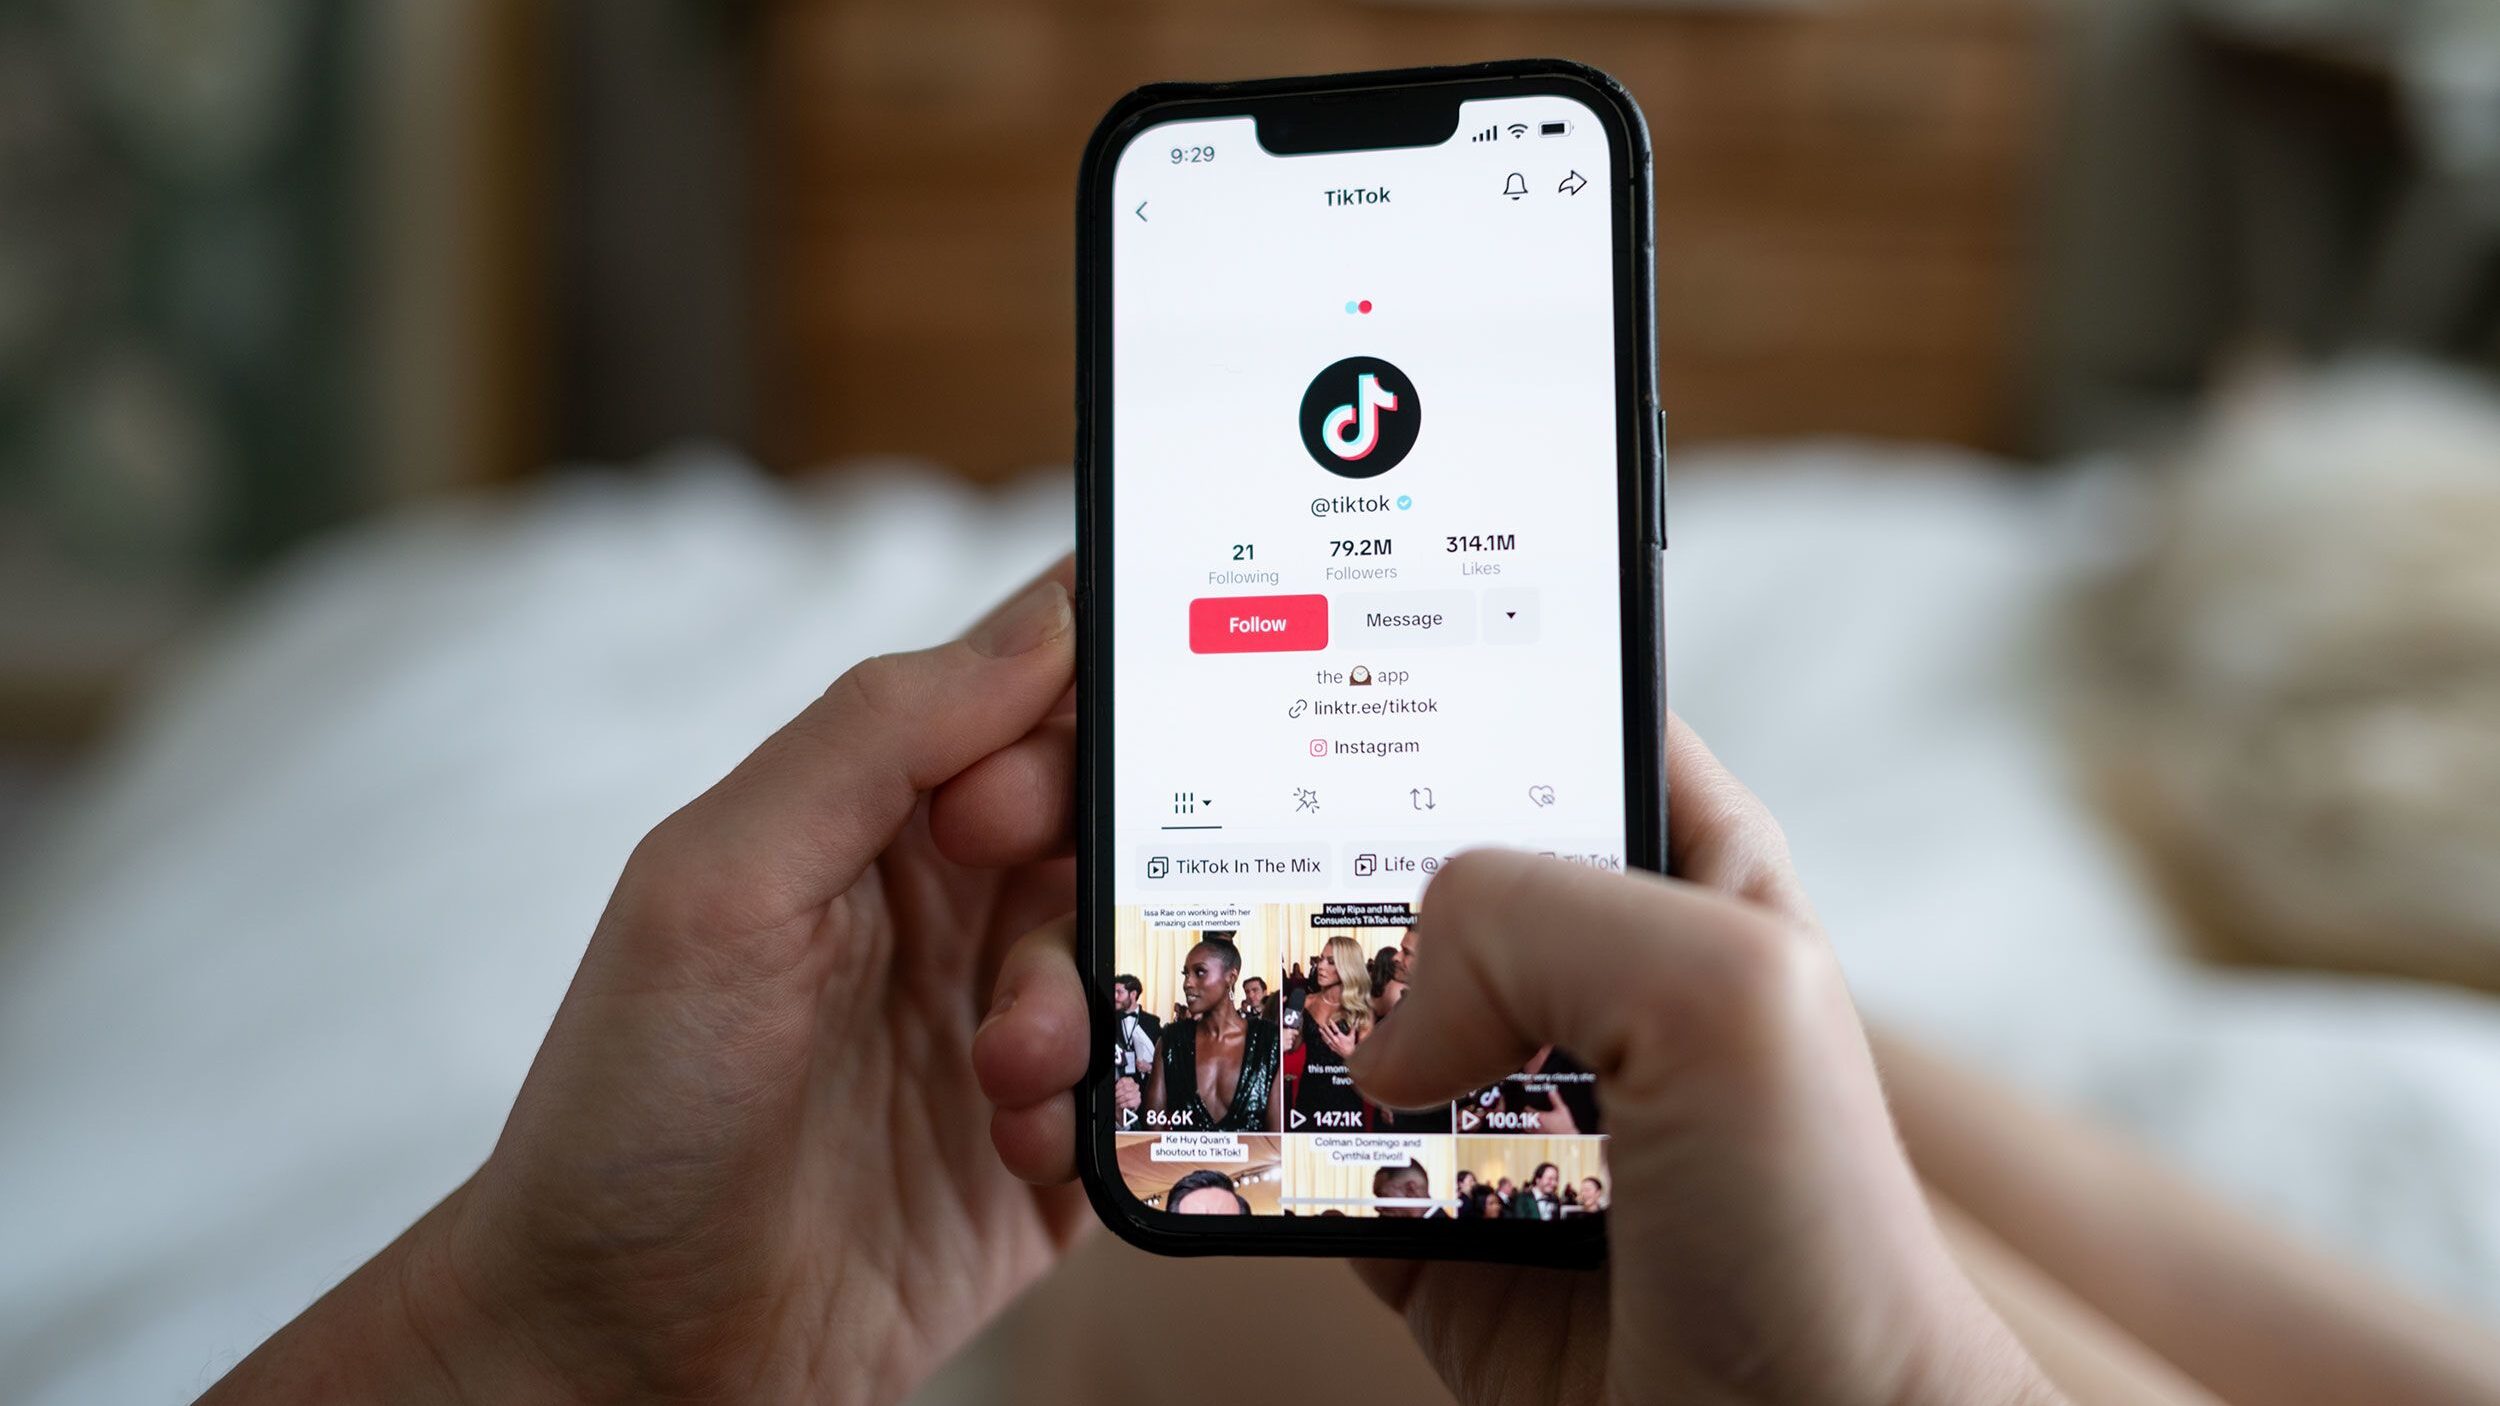 "Could TikTok Be Banned? Latest Update on U.S. Congress’s Decision and What It Means for Users"